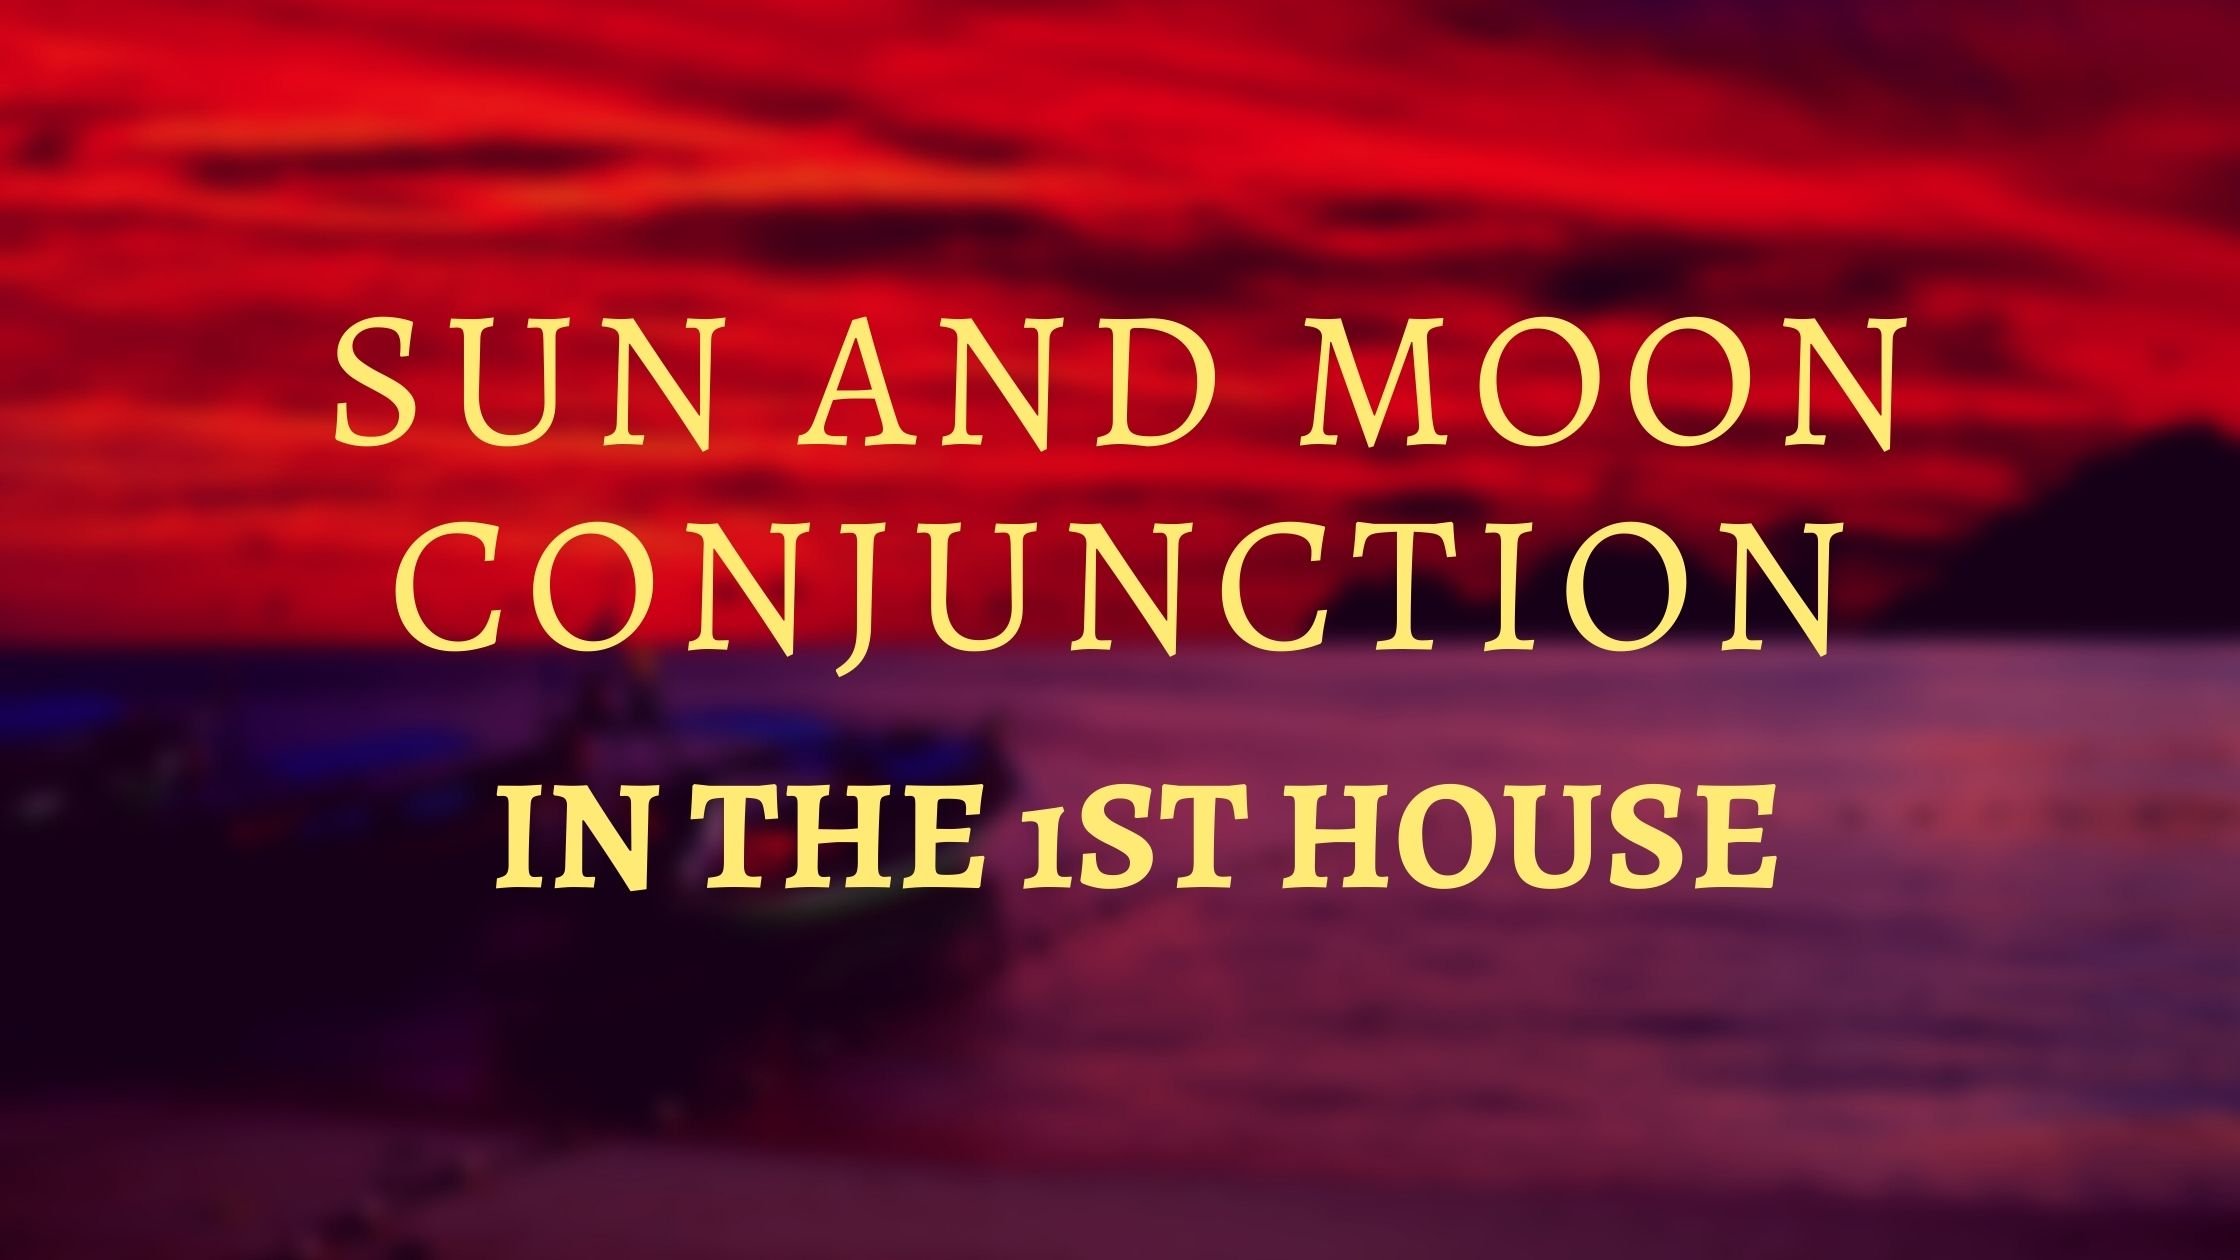 Sun and Moon Conjunction in the 1st house